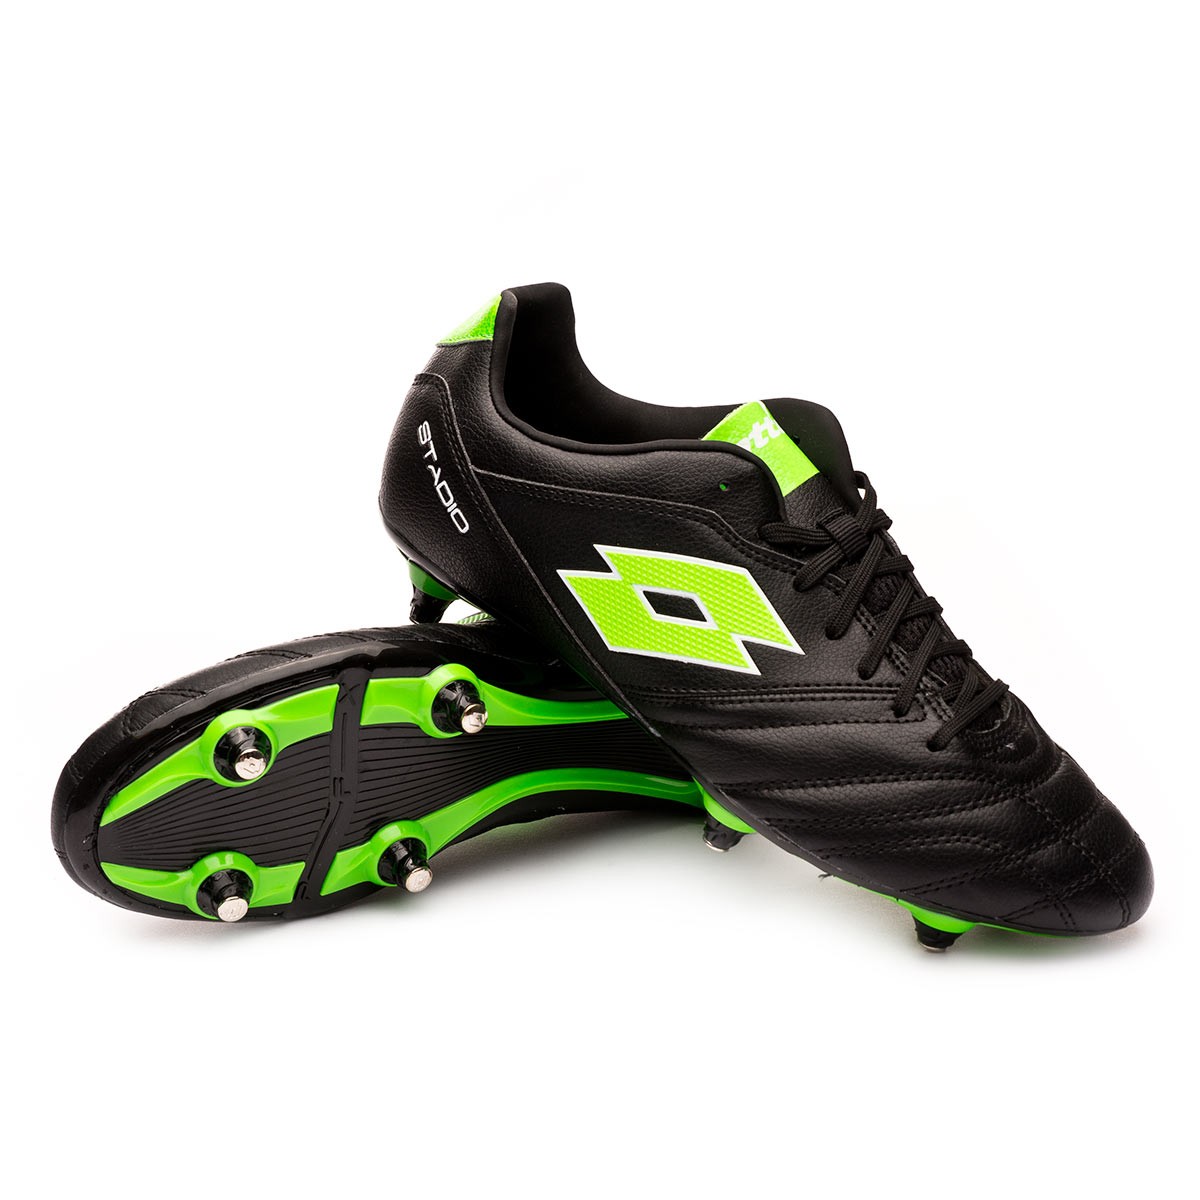 classic lotto football boots